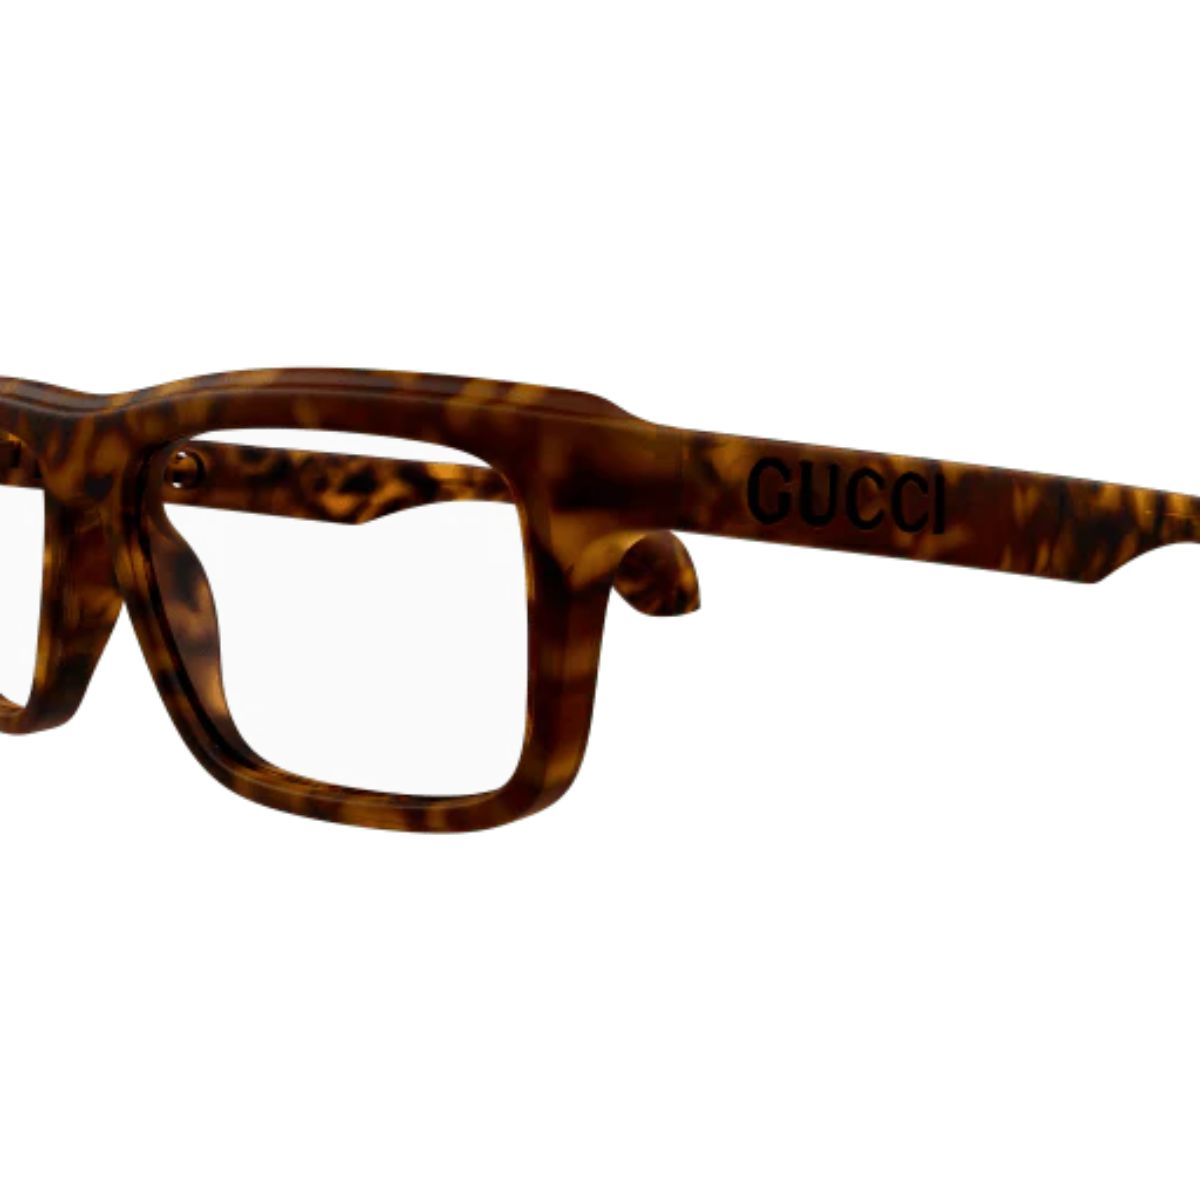 "Gucci 1572O 002 Spectacles for Fashionable Men"